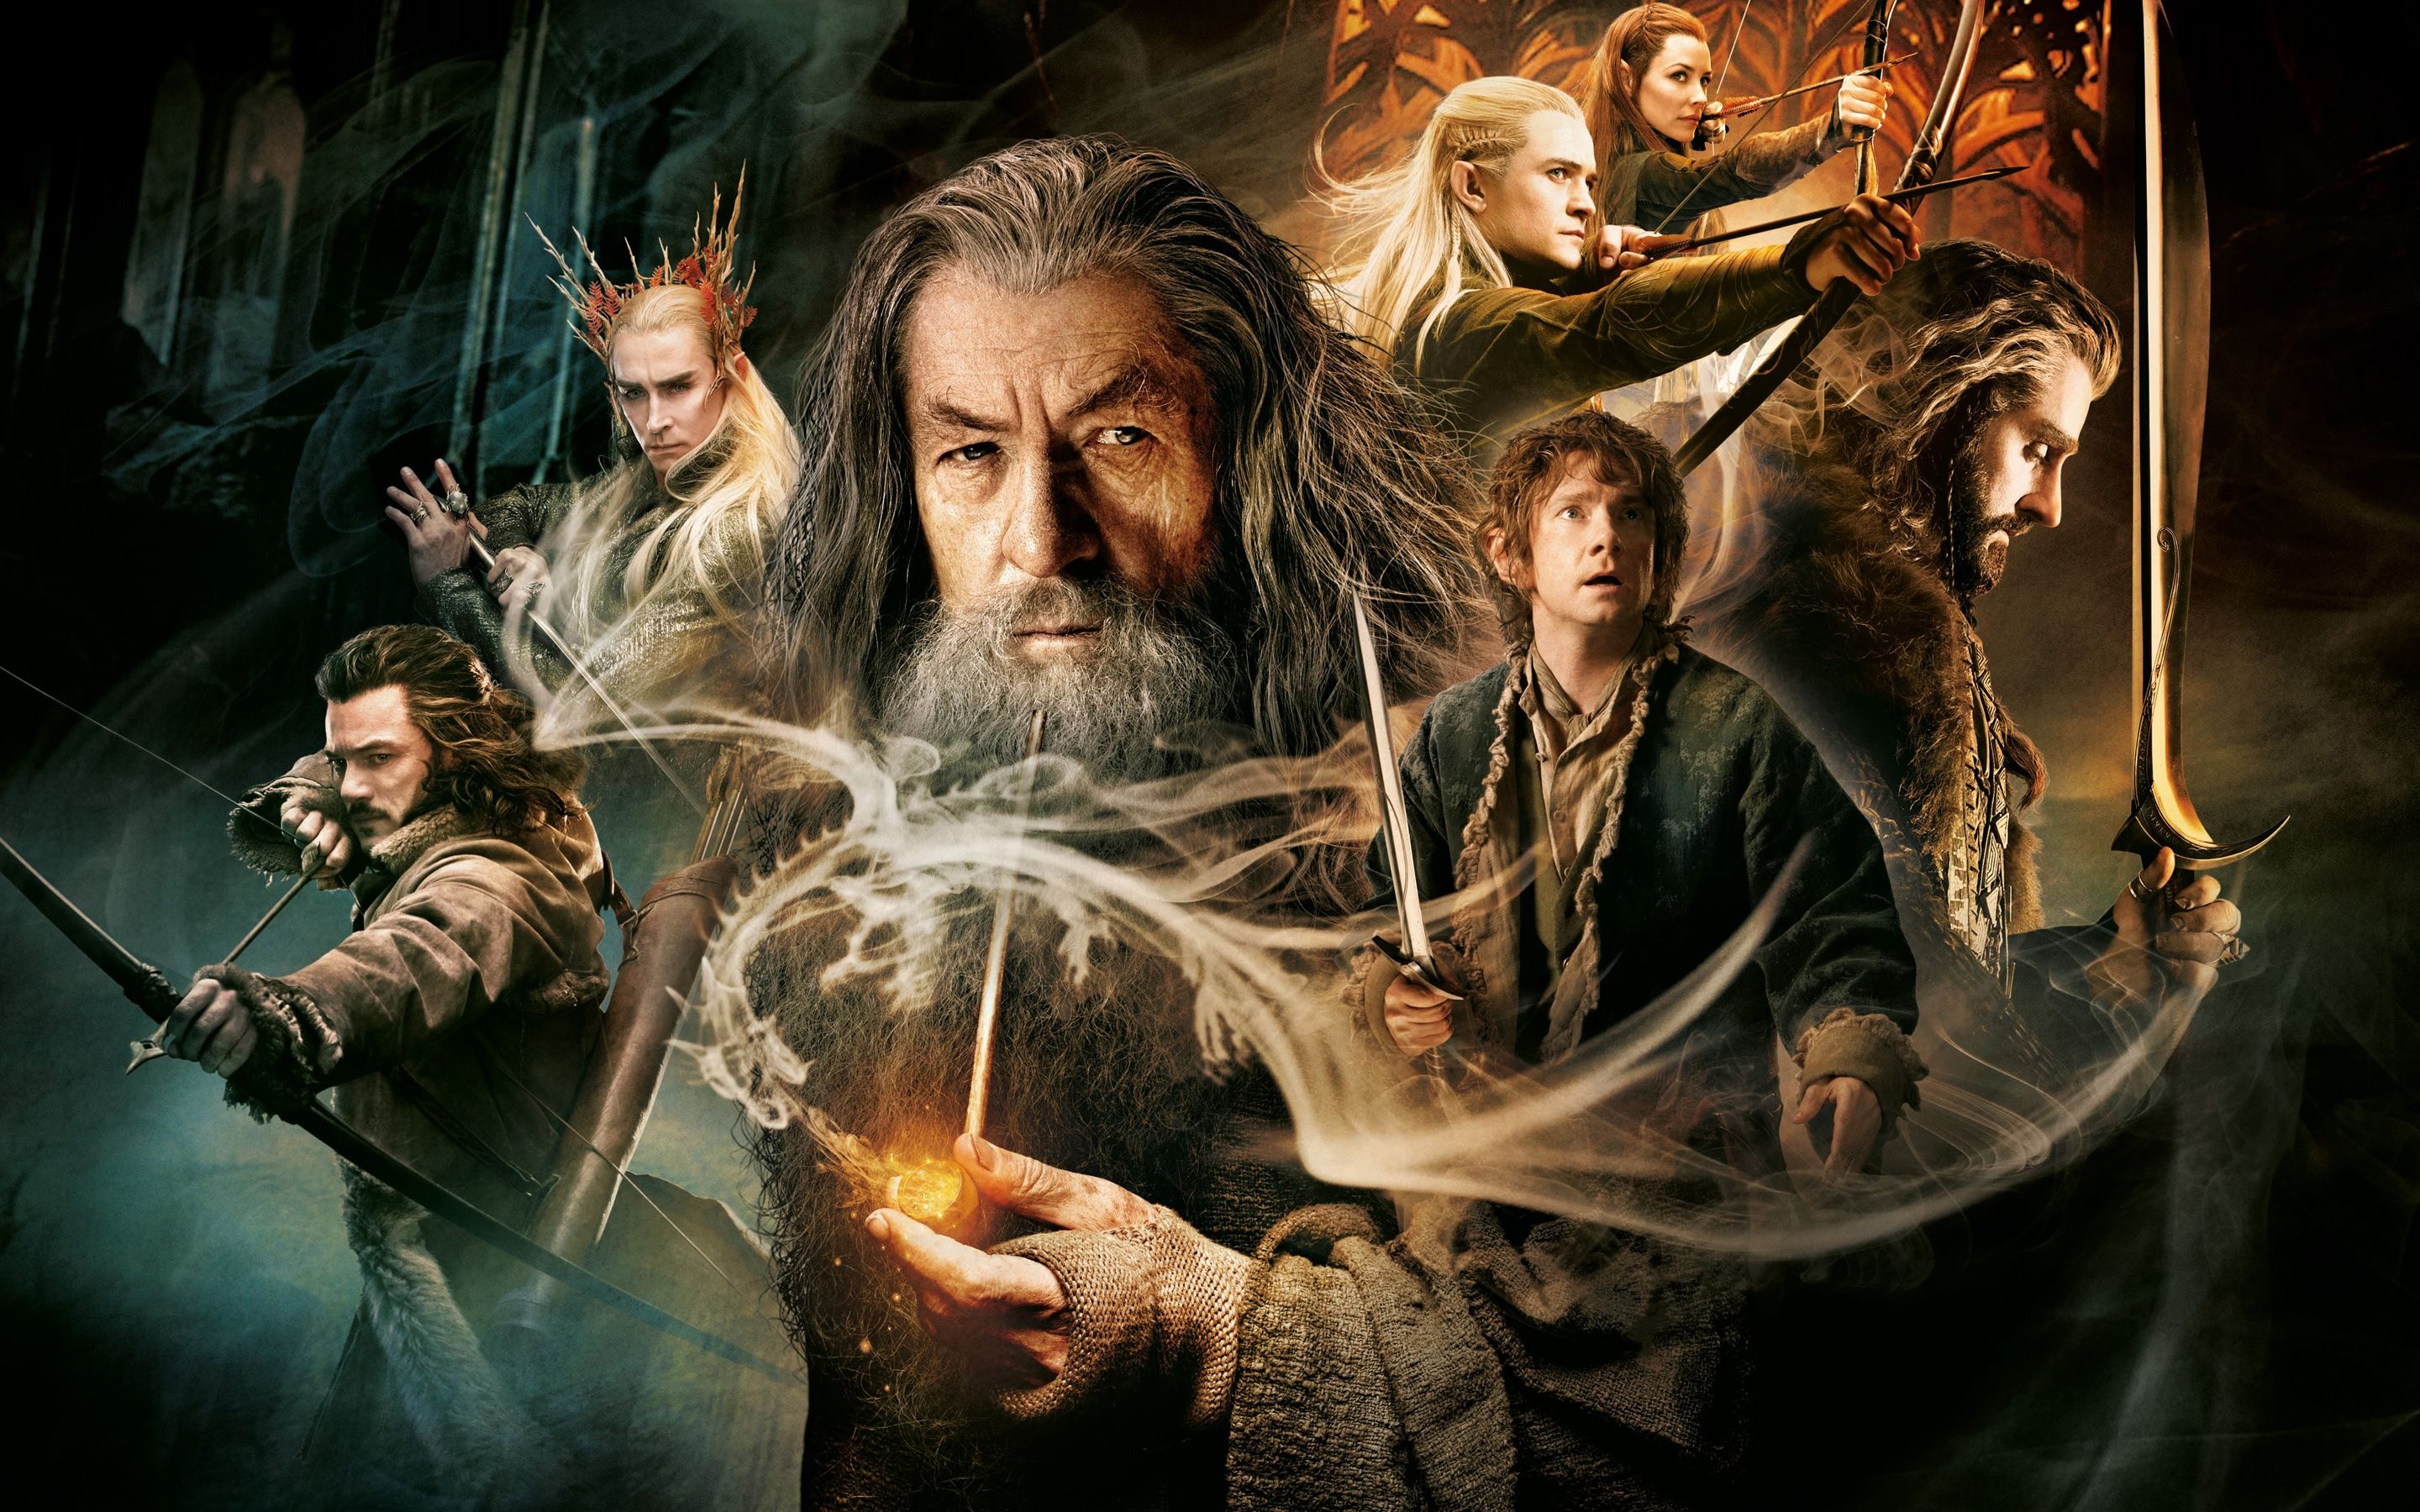 Hobbits of LOTR, Fellowship of the Ring, Bilbo's adventures, Middle-earth's heroes, 2880x1800 HD Desktop